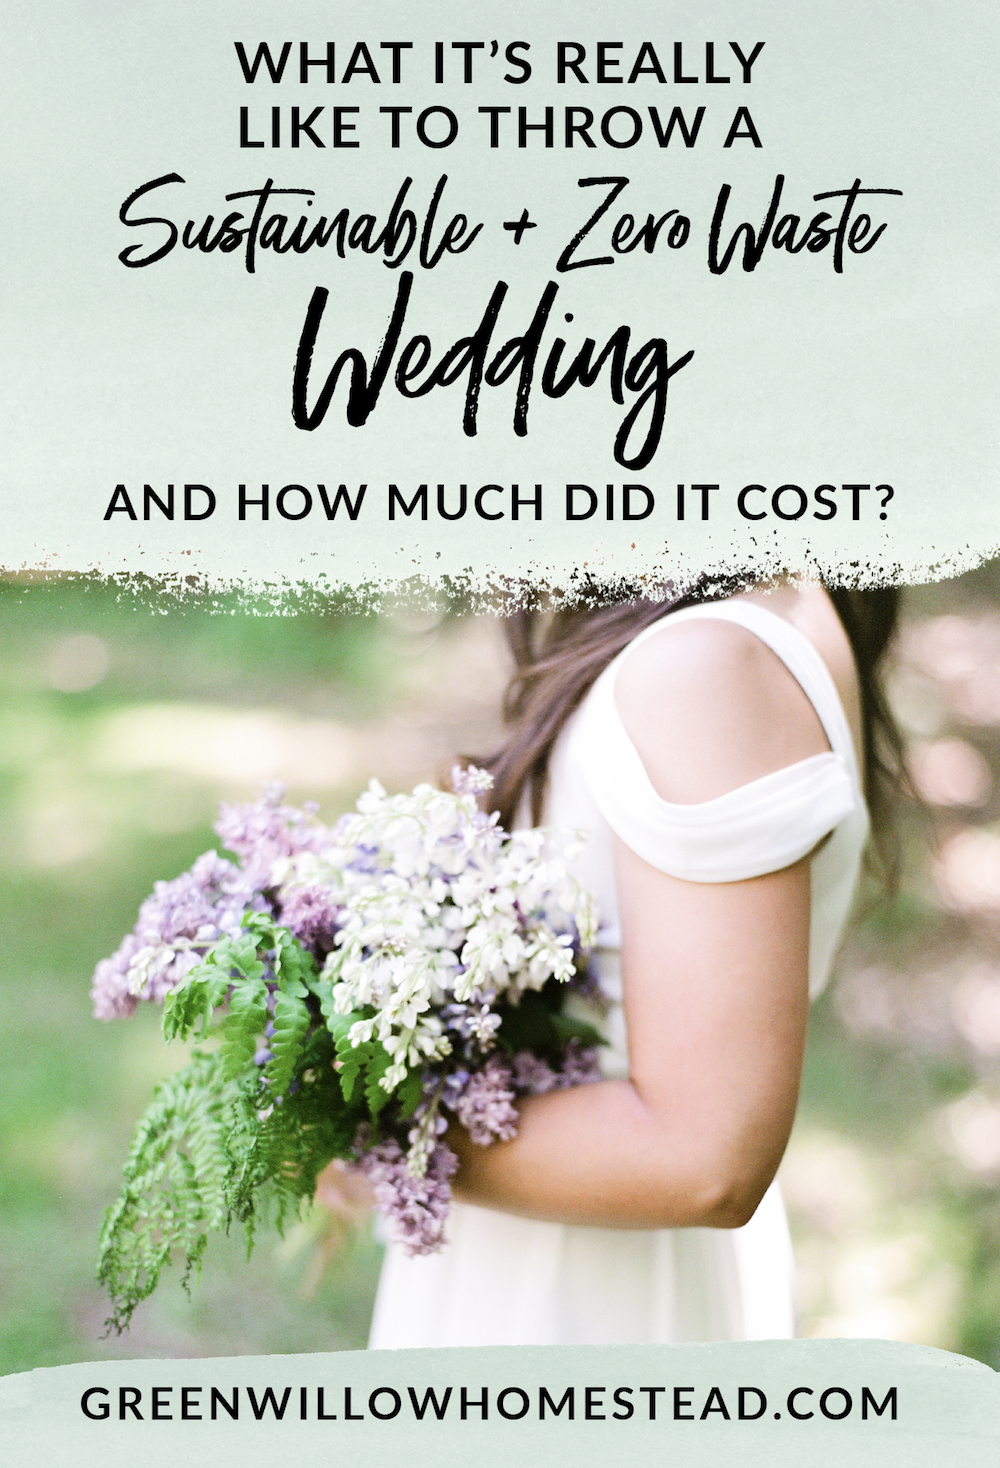 What was it like to plan and throw a sustainable zero waste wedding and how much did it cost?